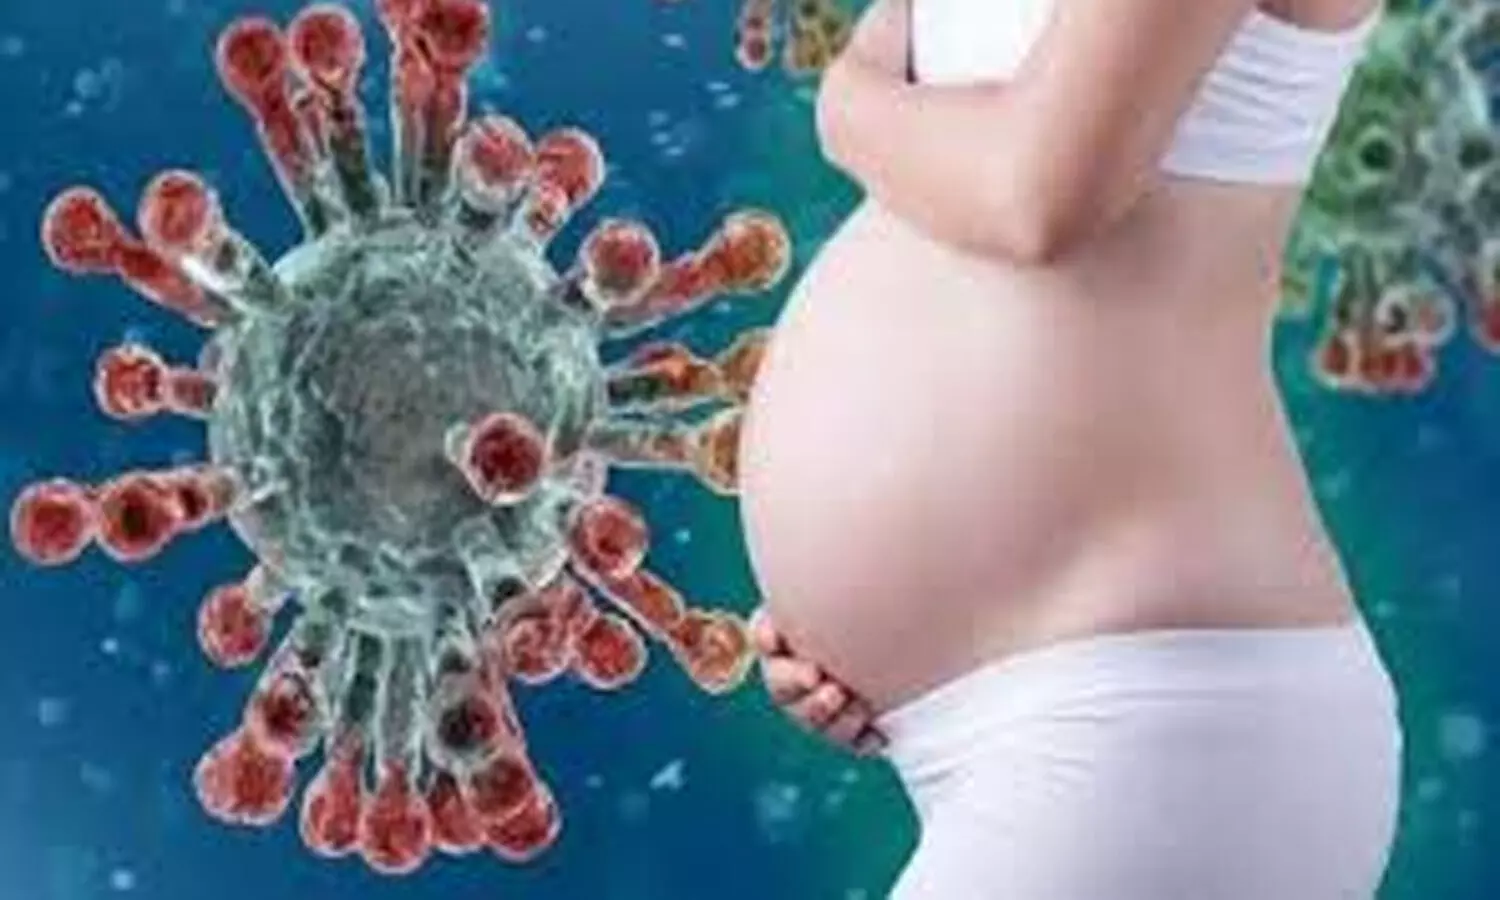 Management of coronavirus infection in pregnancy: National guidance